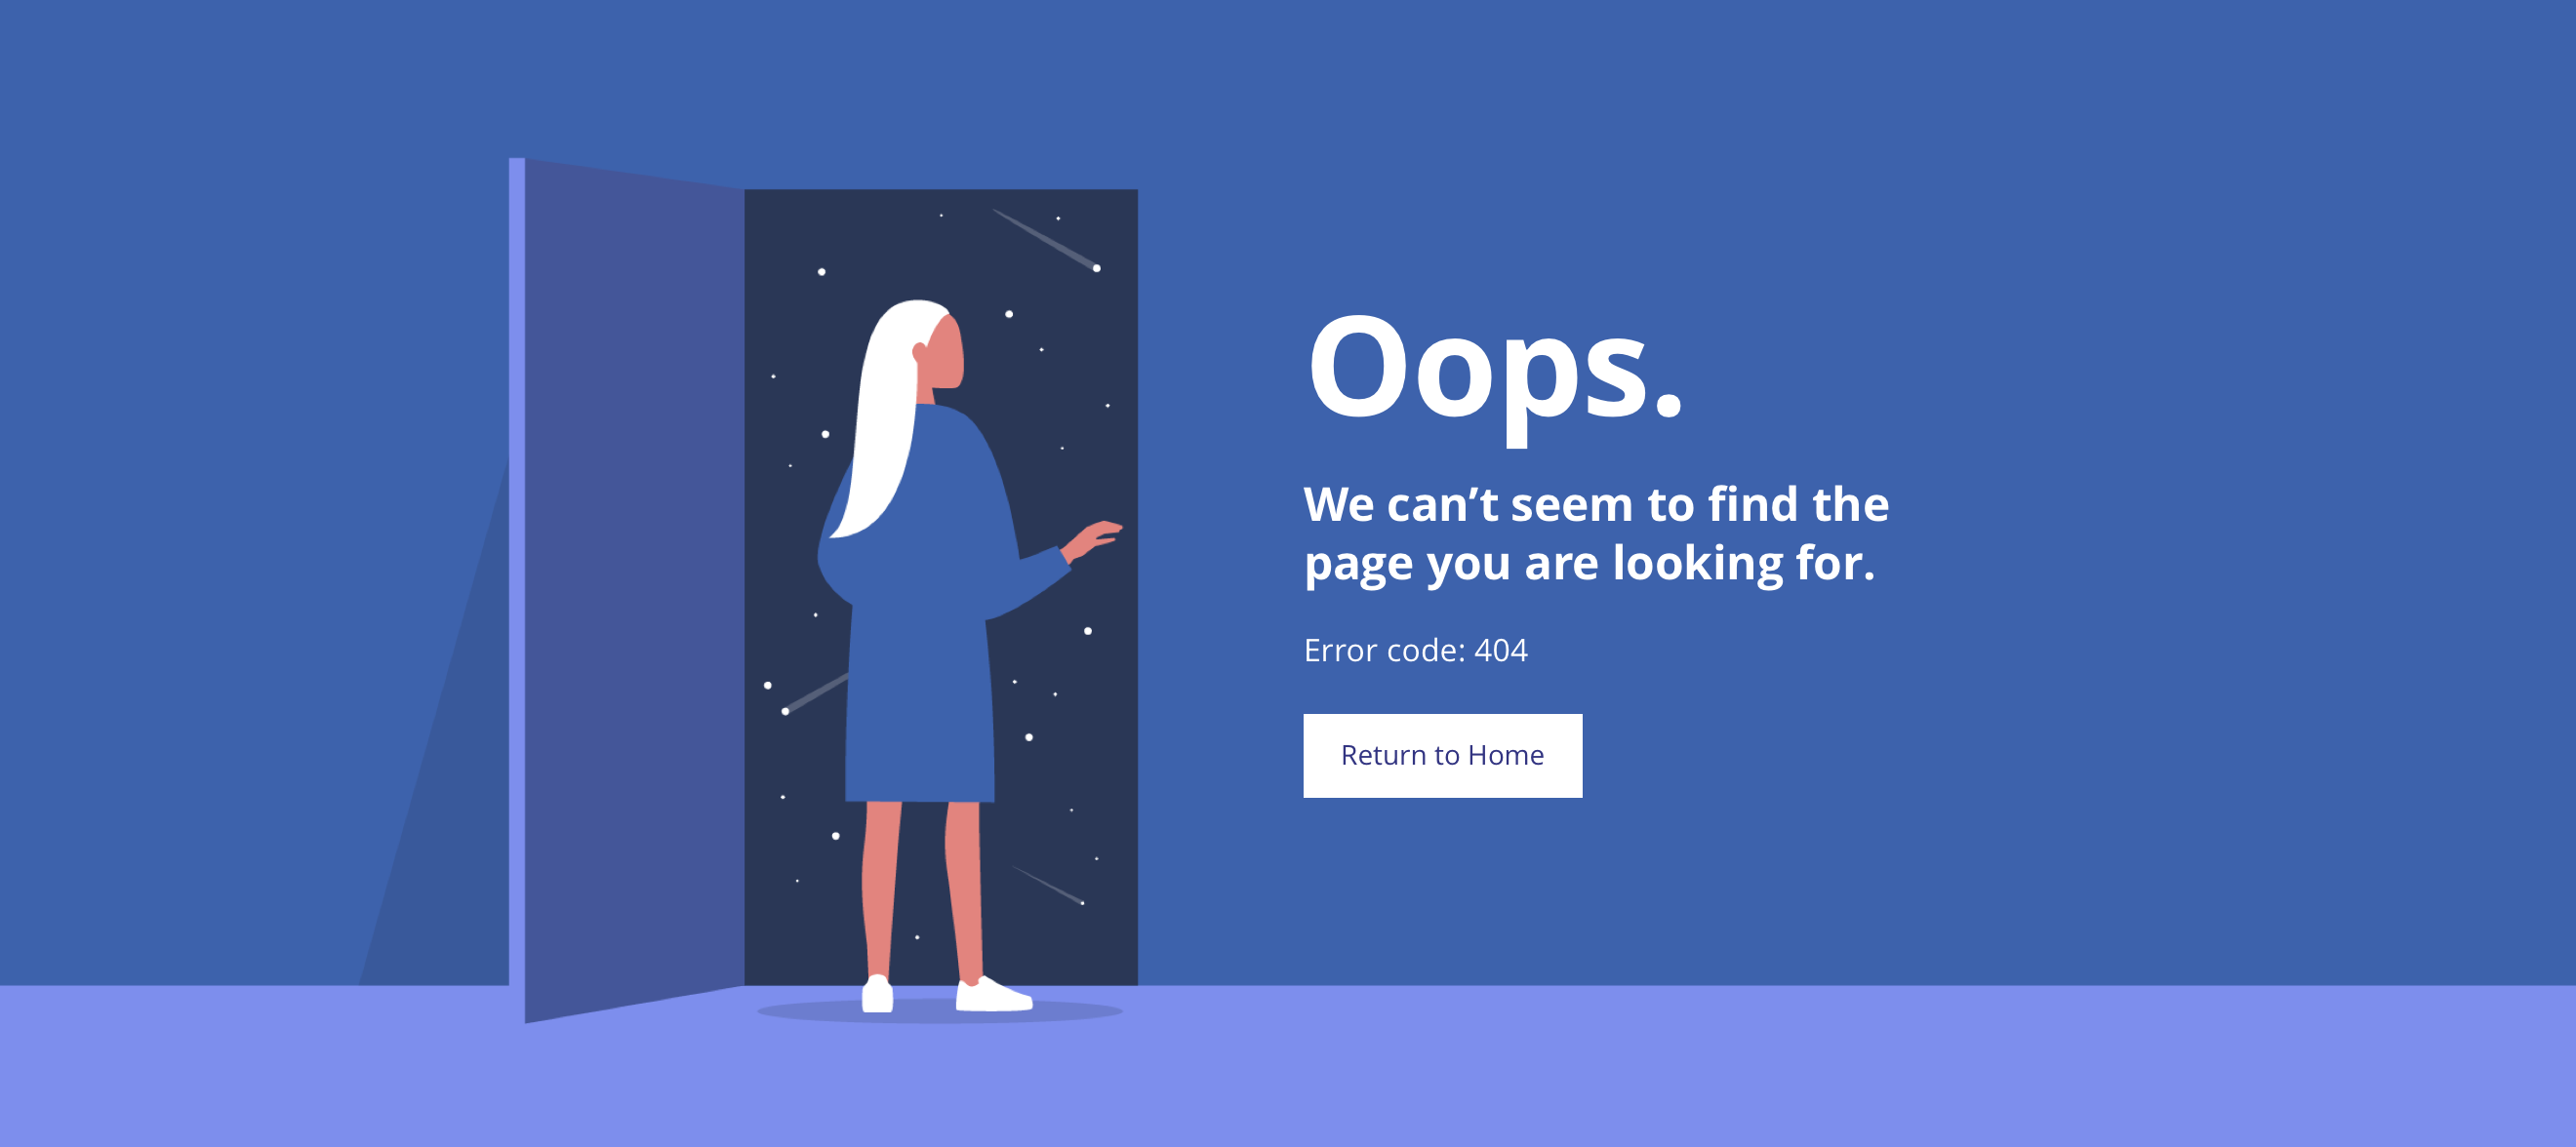 Oops! We can’t seem to find the page you are looking for. Error code: 404